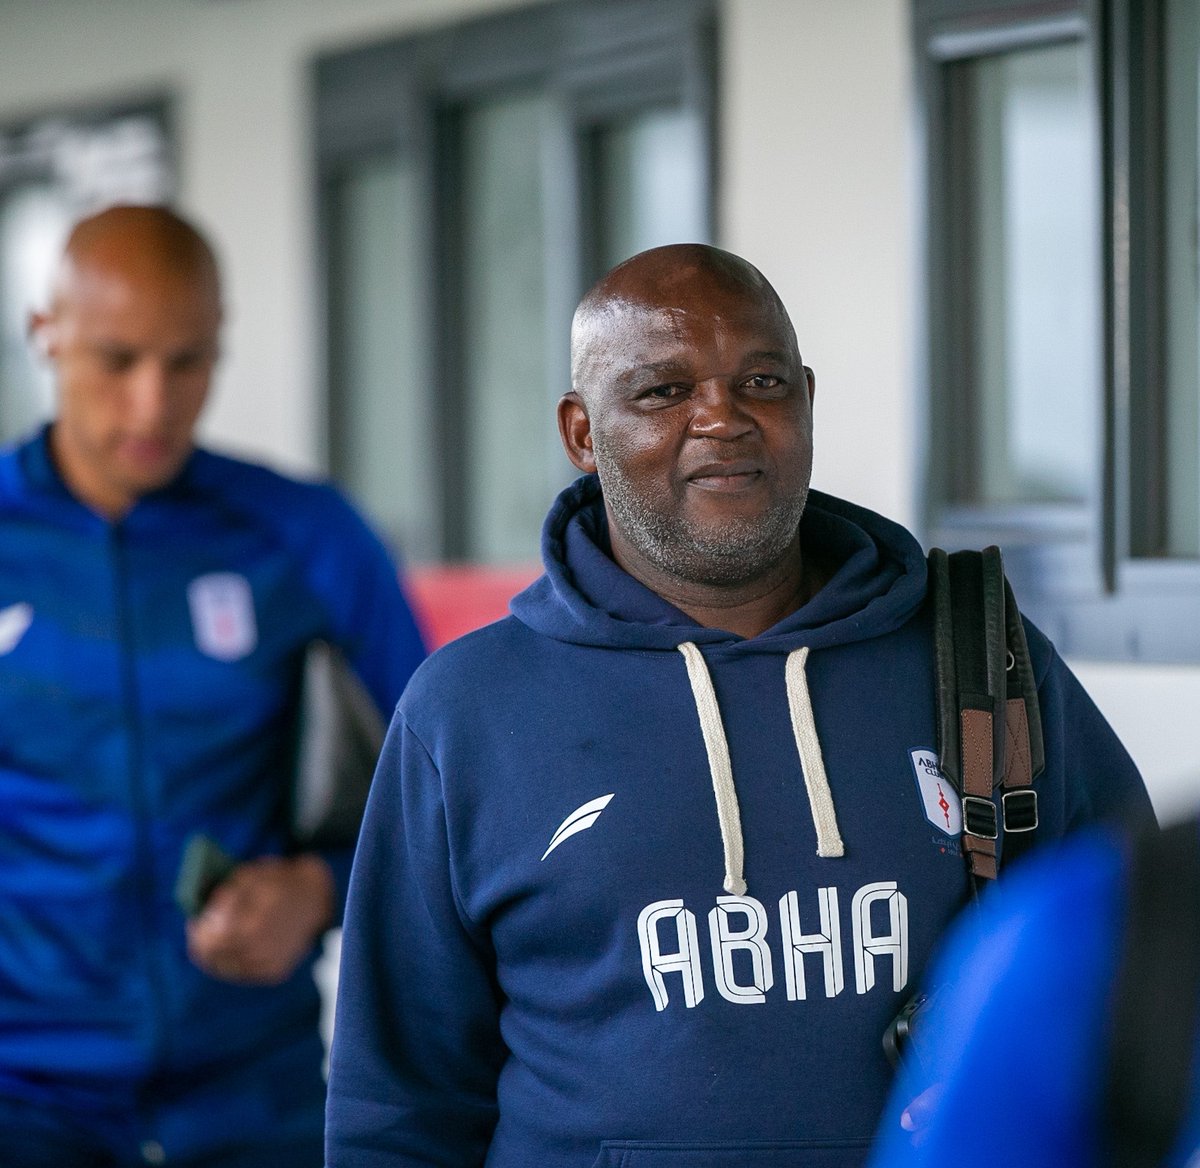 Pitso took Sundowns from relegation zone to Success He took sinking AL Ahly to 2 champions league He took AL Ahli Saudi from division 1 to pro league Now he is saving sinking Abha from relegation GREATEST OF ALL TIME